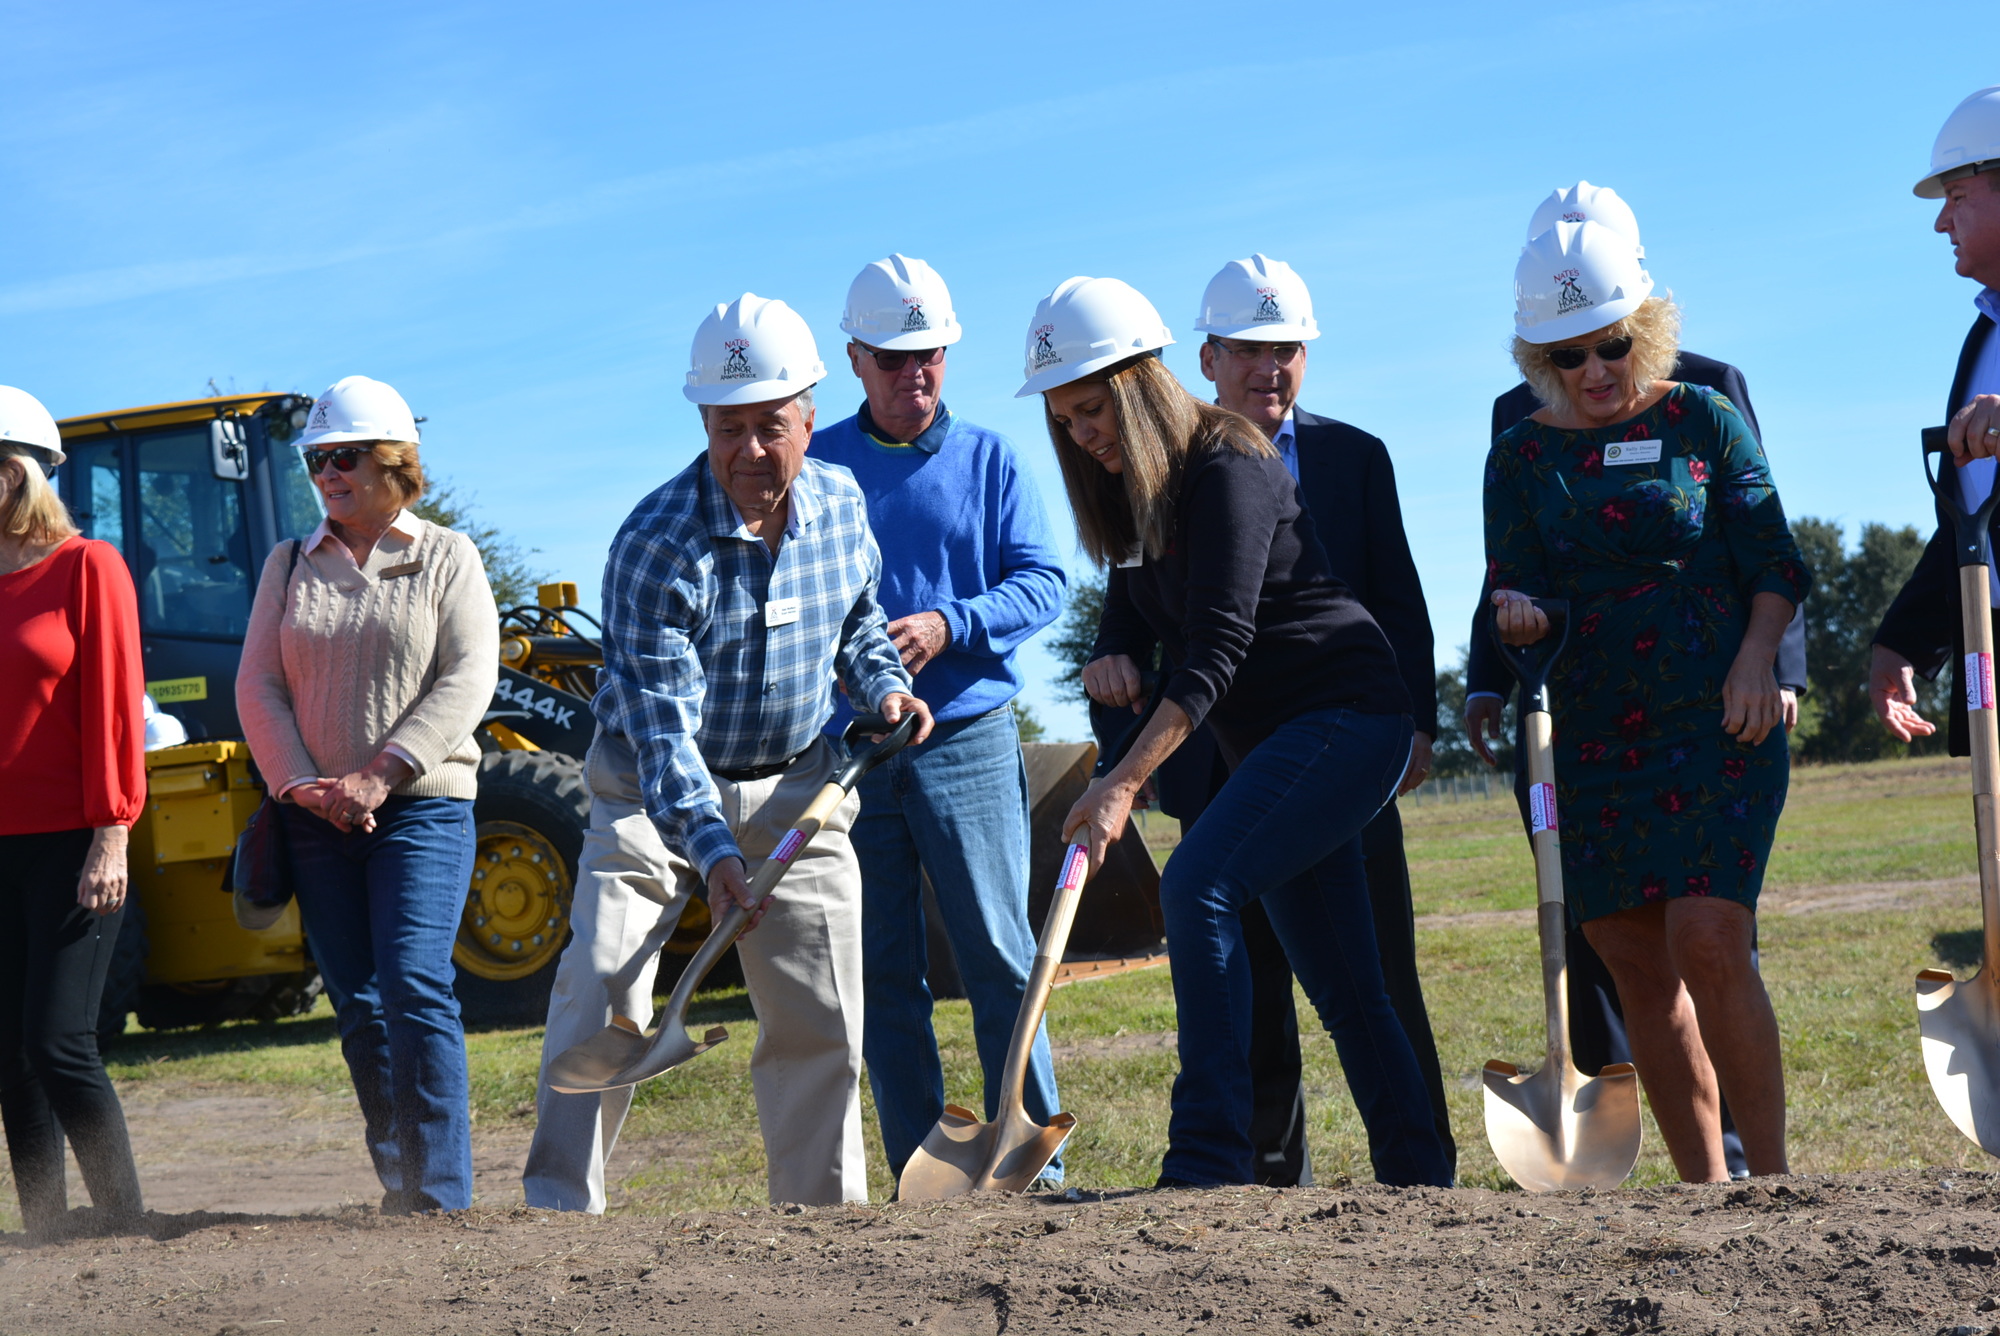 Nate's Honor Animal Rescue Board President Al Wolfson and Executive Director Dari Oglesby join other officials and board members in a ceremonial groundbreaking ceremony Dec. 6. Construction is expected to last about one year.